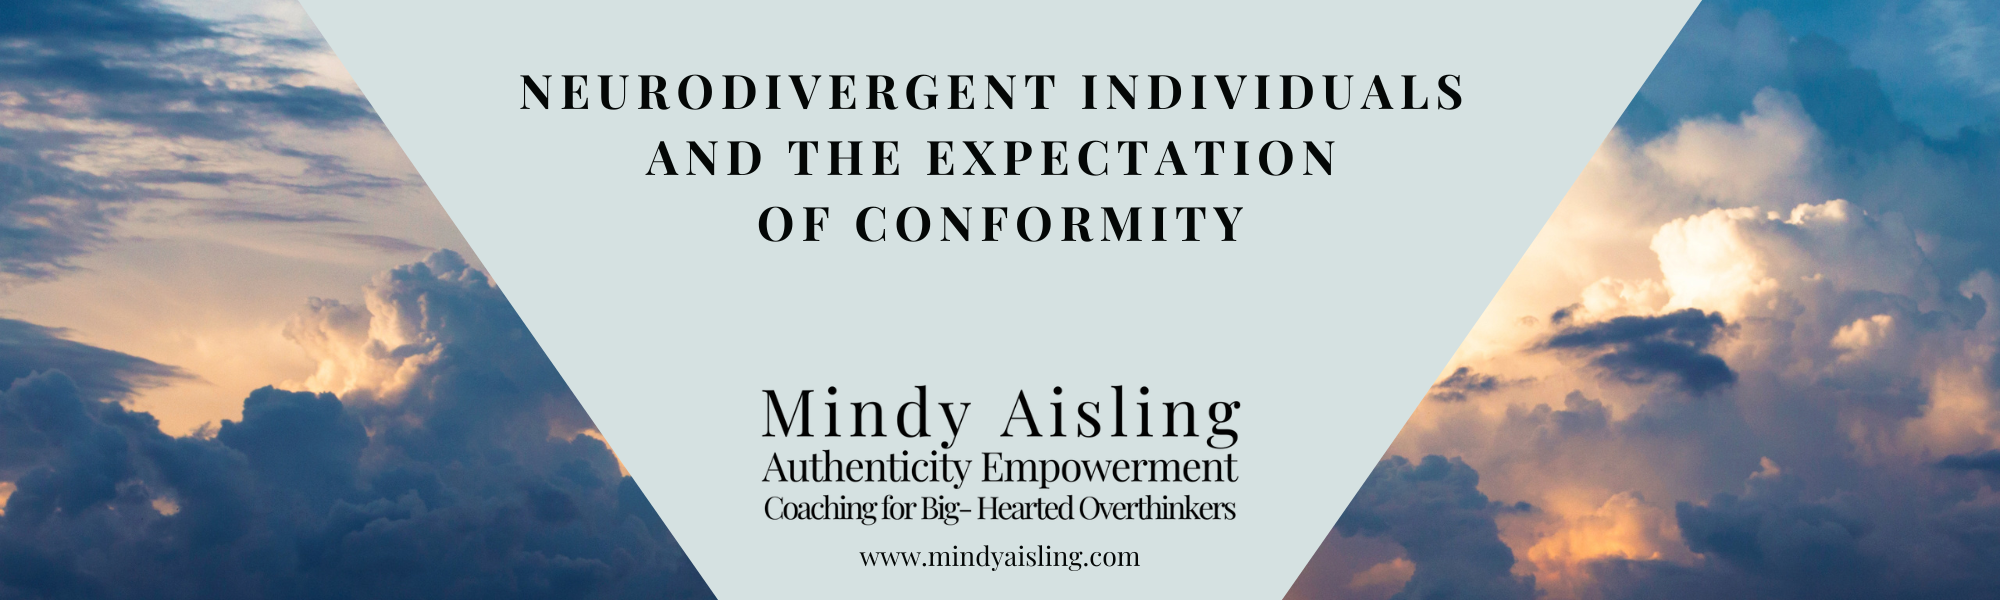 Neurodivergent Individuals and the Expectation of Conformity